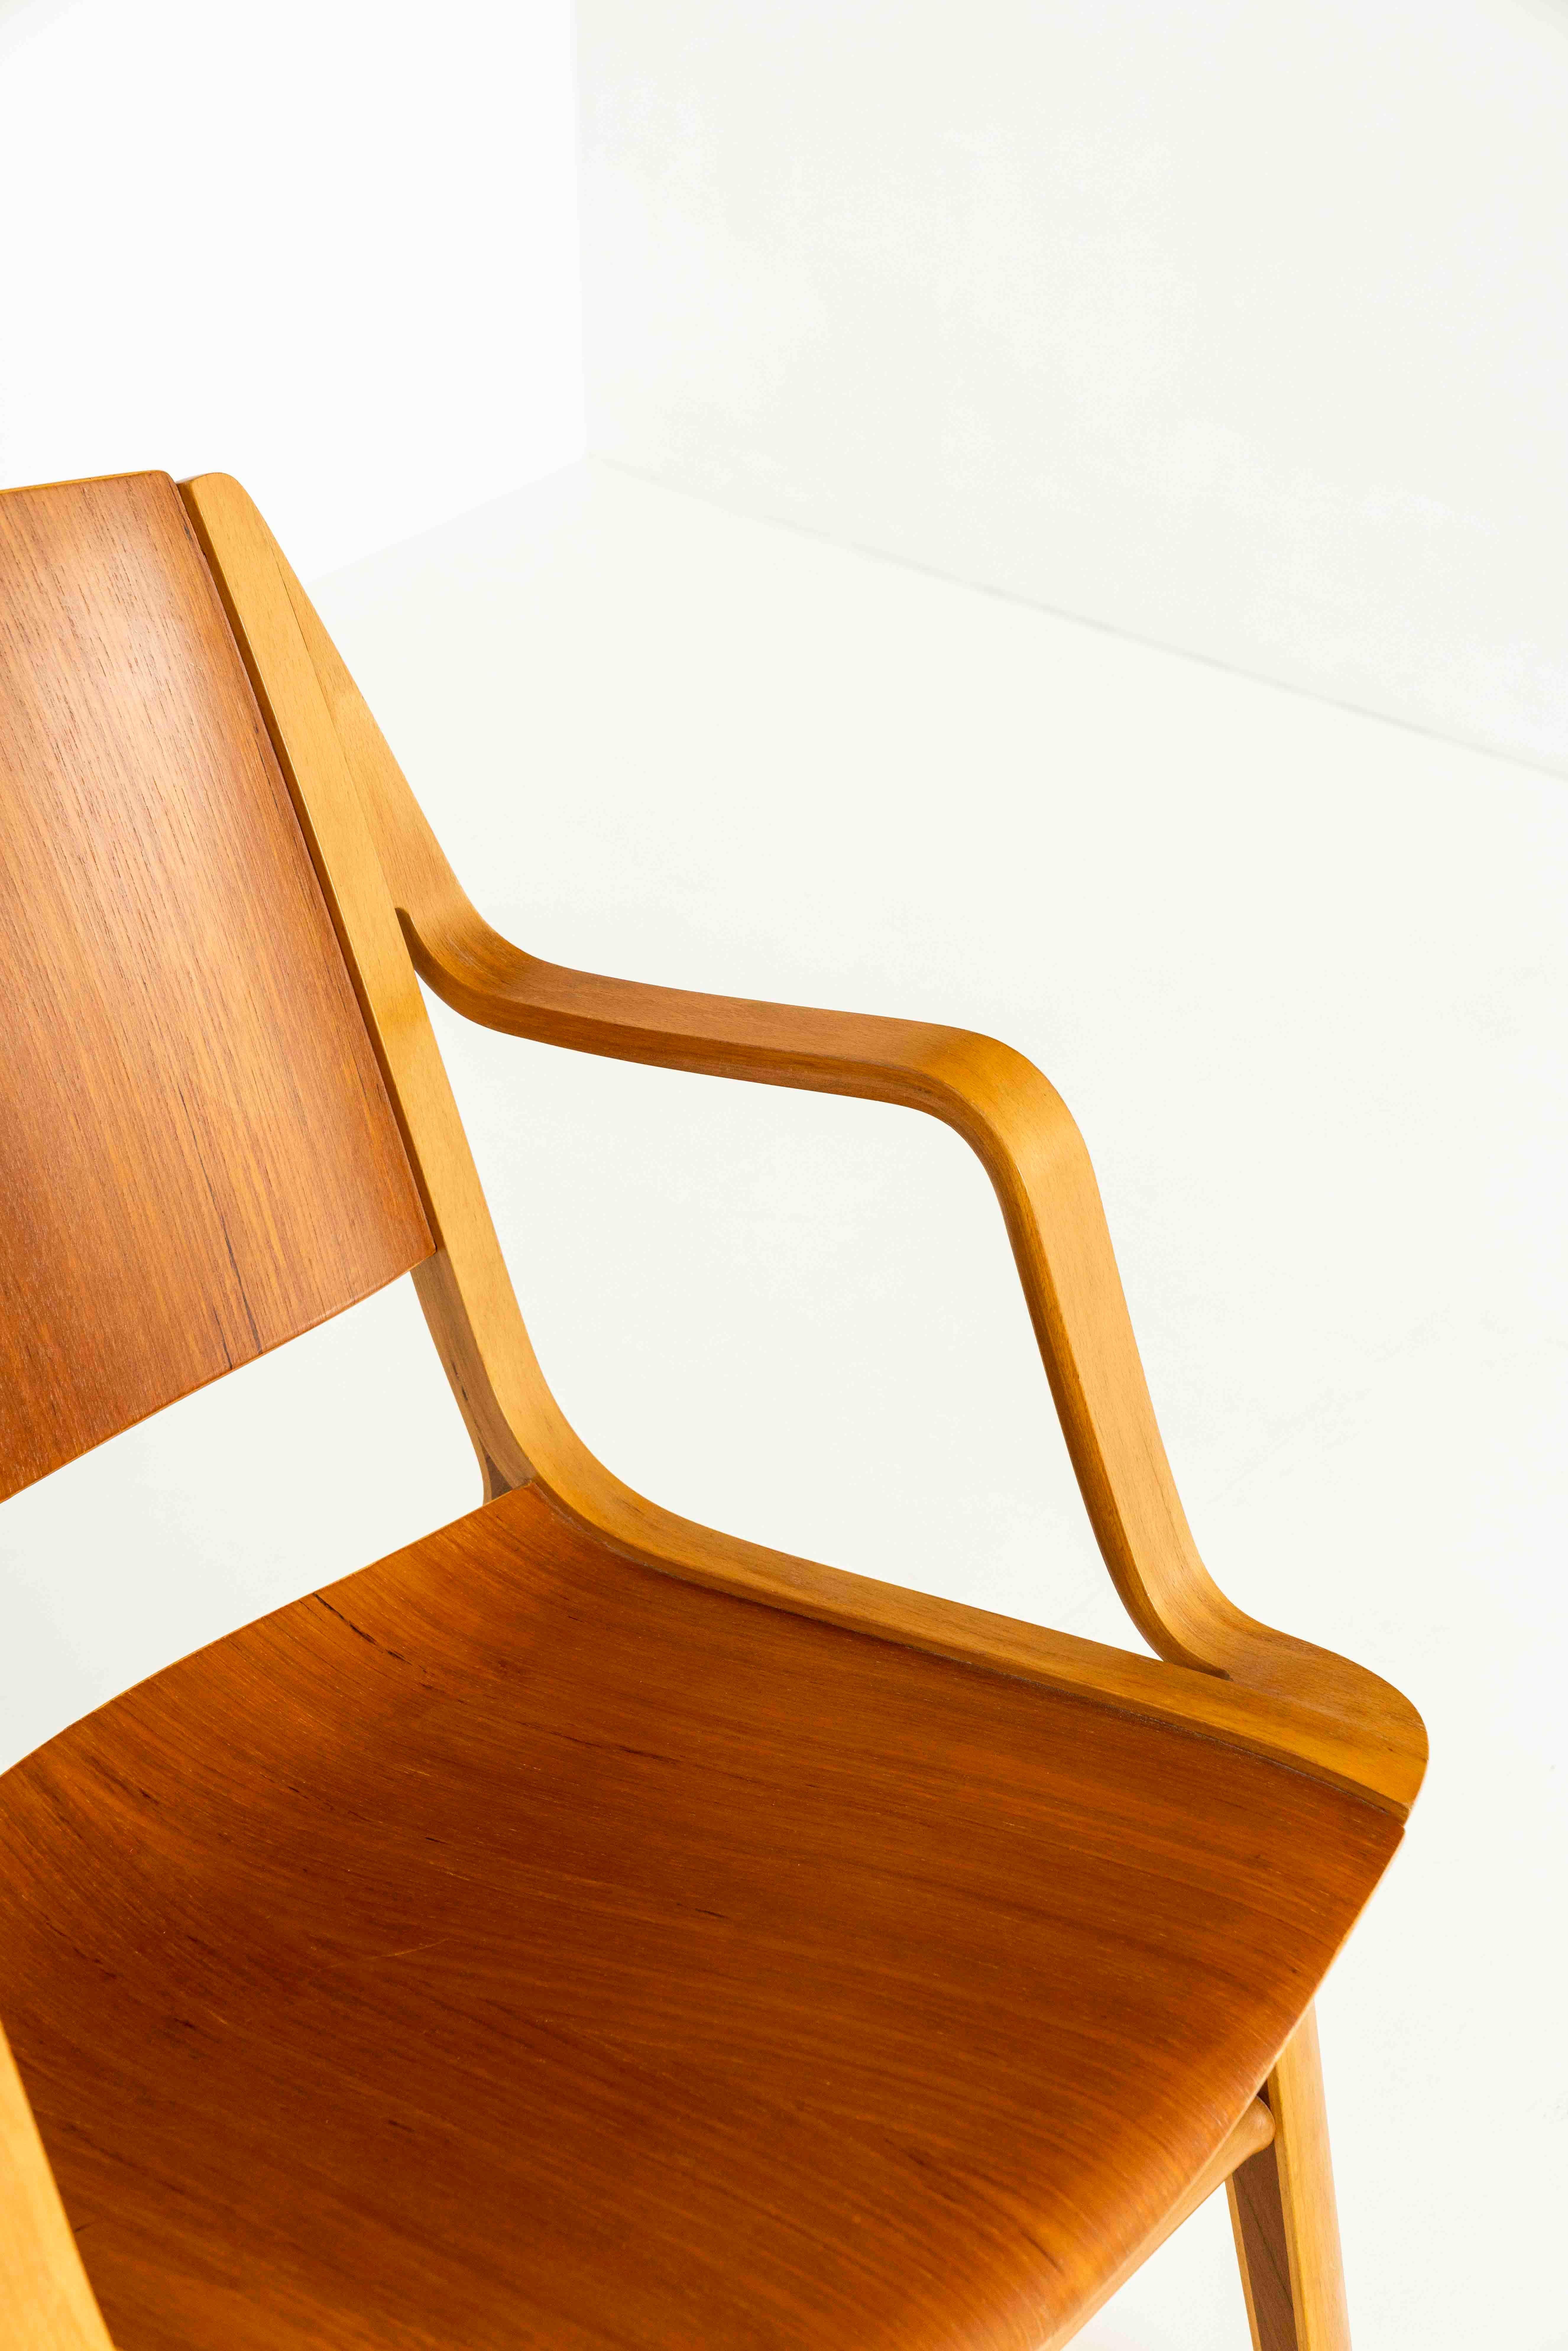 Mahogany 'Ax Chair' by Peter Hvidt & Orla Mølgaard Nielsen from the 1950s, Denmark